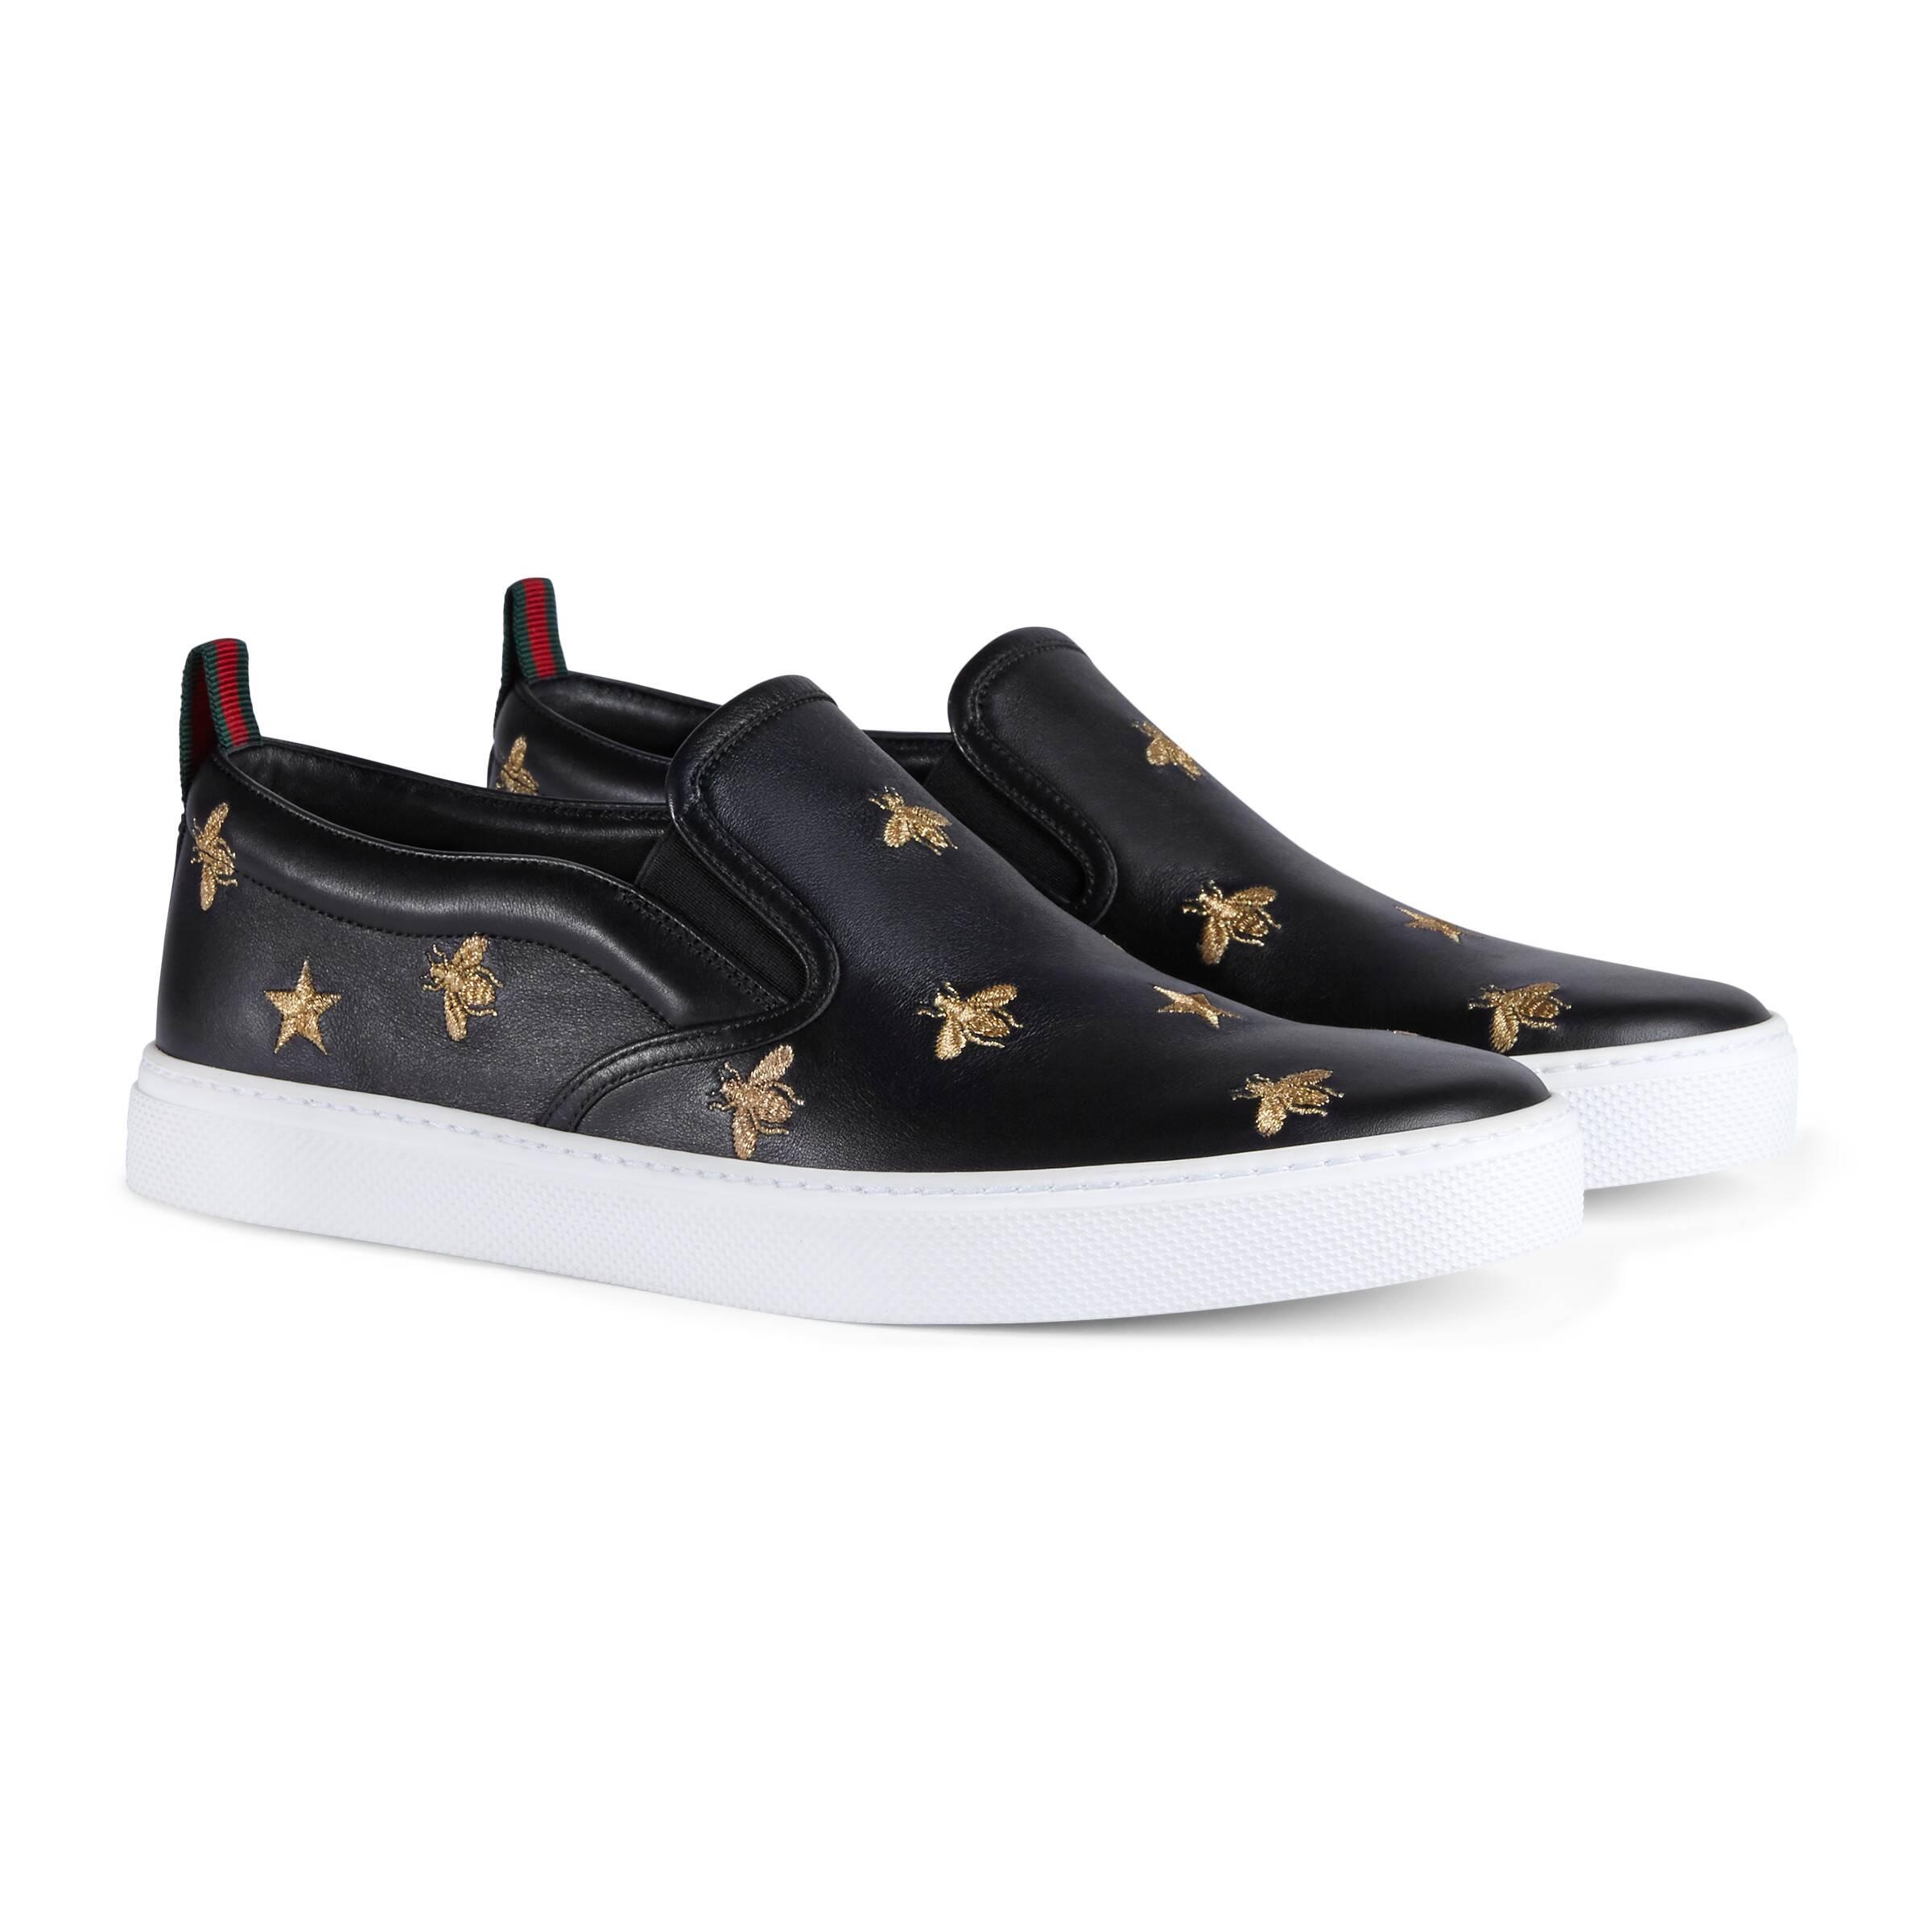 Gucci Leather Slip-on Sneakers With Bees in Black for Men - Lyst